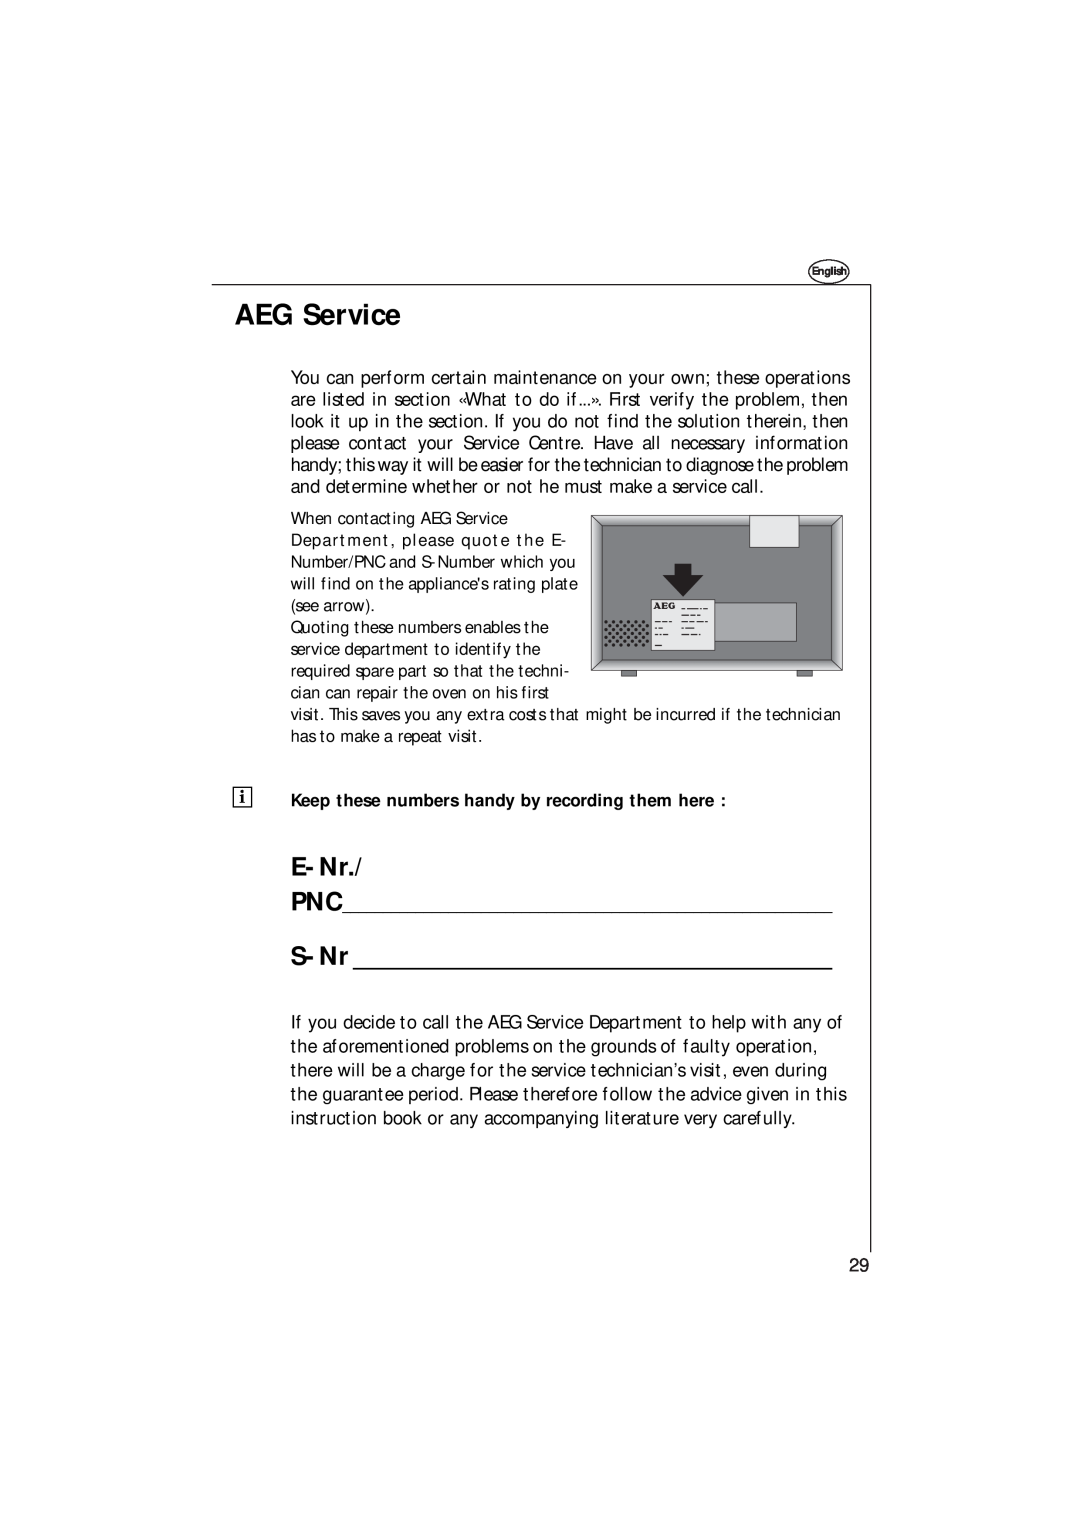 AEG 153 E manual AEG Service, Keep these numbers handy by recording them here, E-Nr, S-Nr 